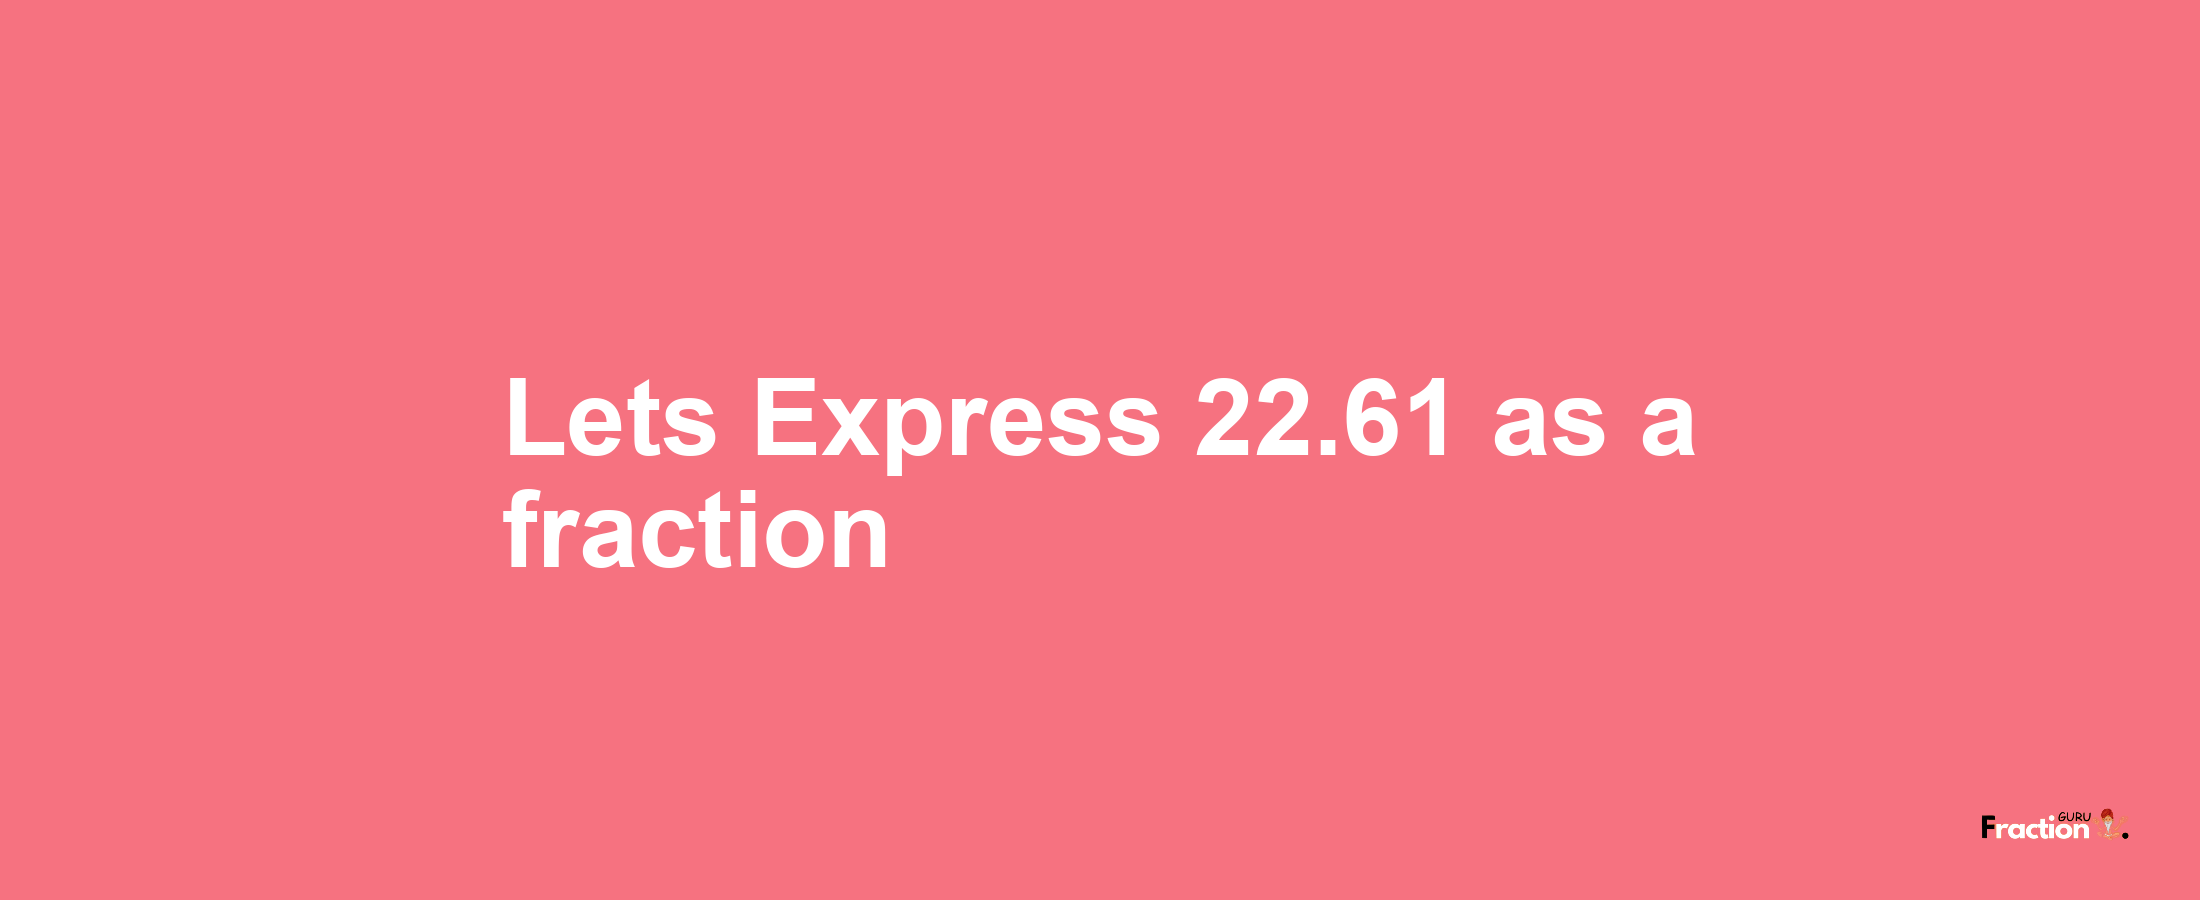 Lets Express 22.61 as afraction